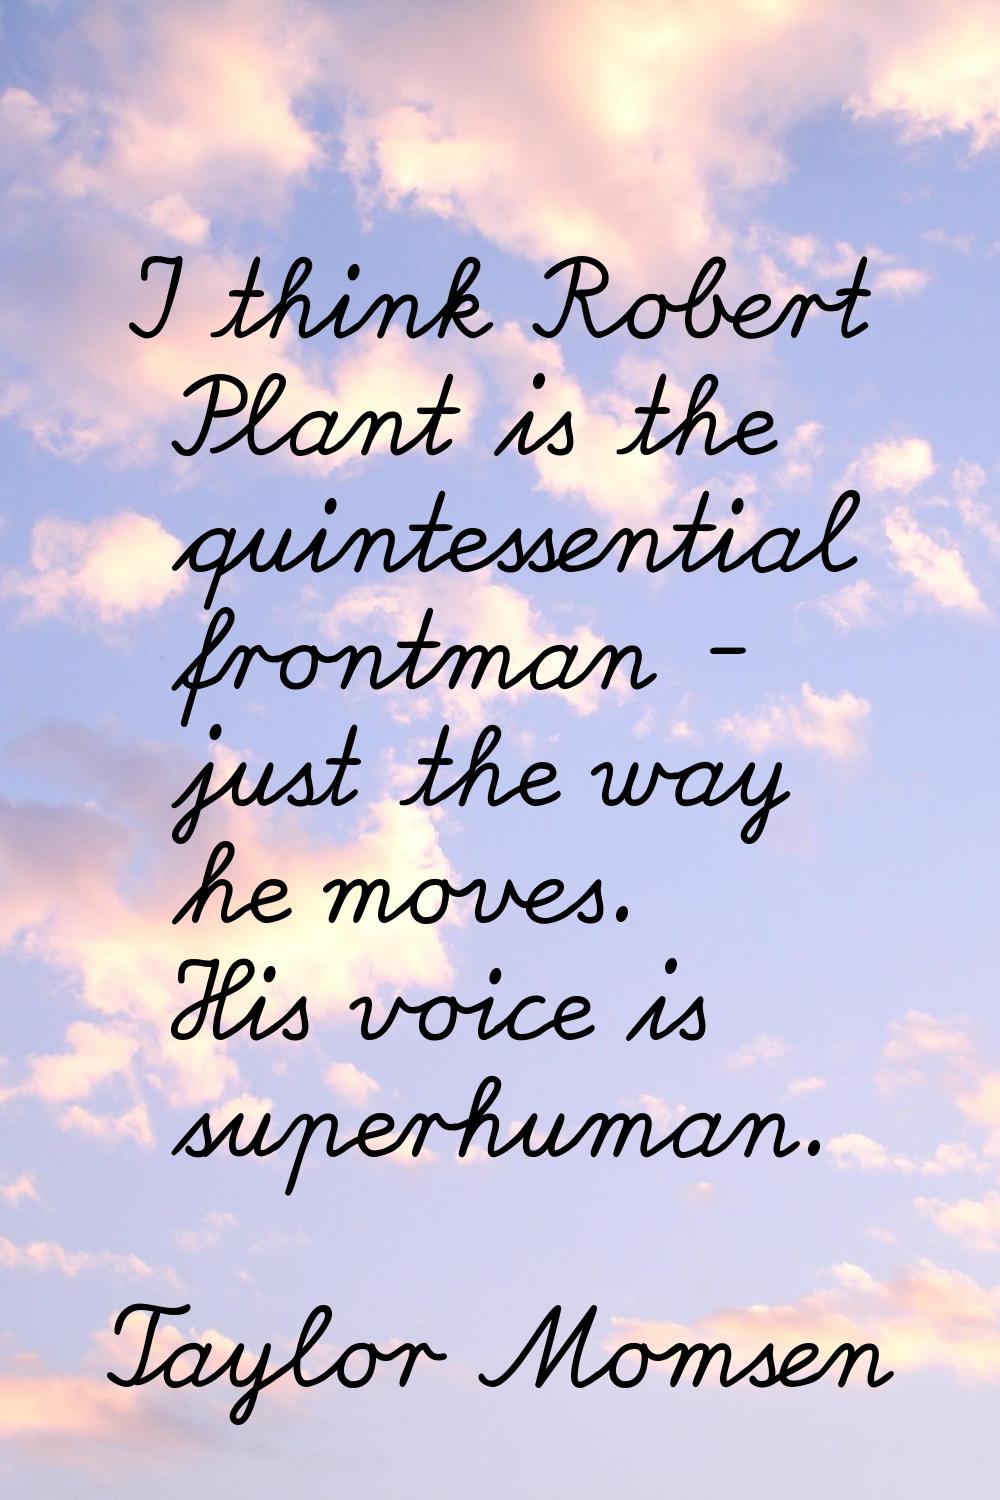 I think Robert Plant is the quintessential frontman - just the way he moves. His voice is superhuma